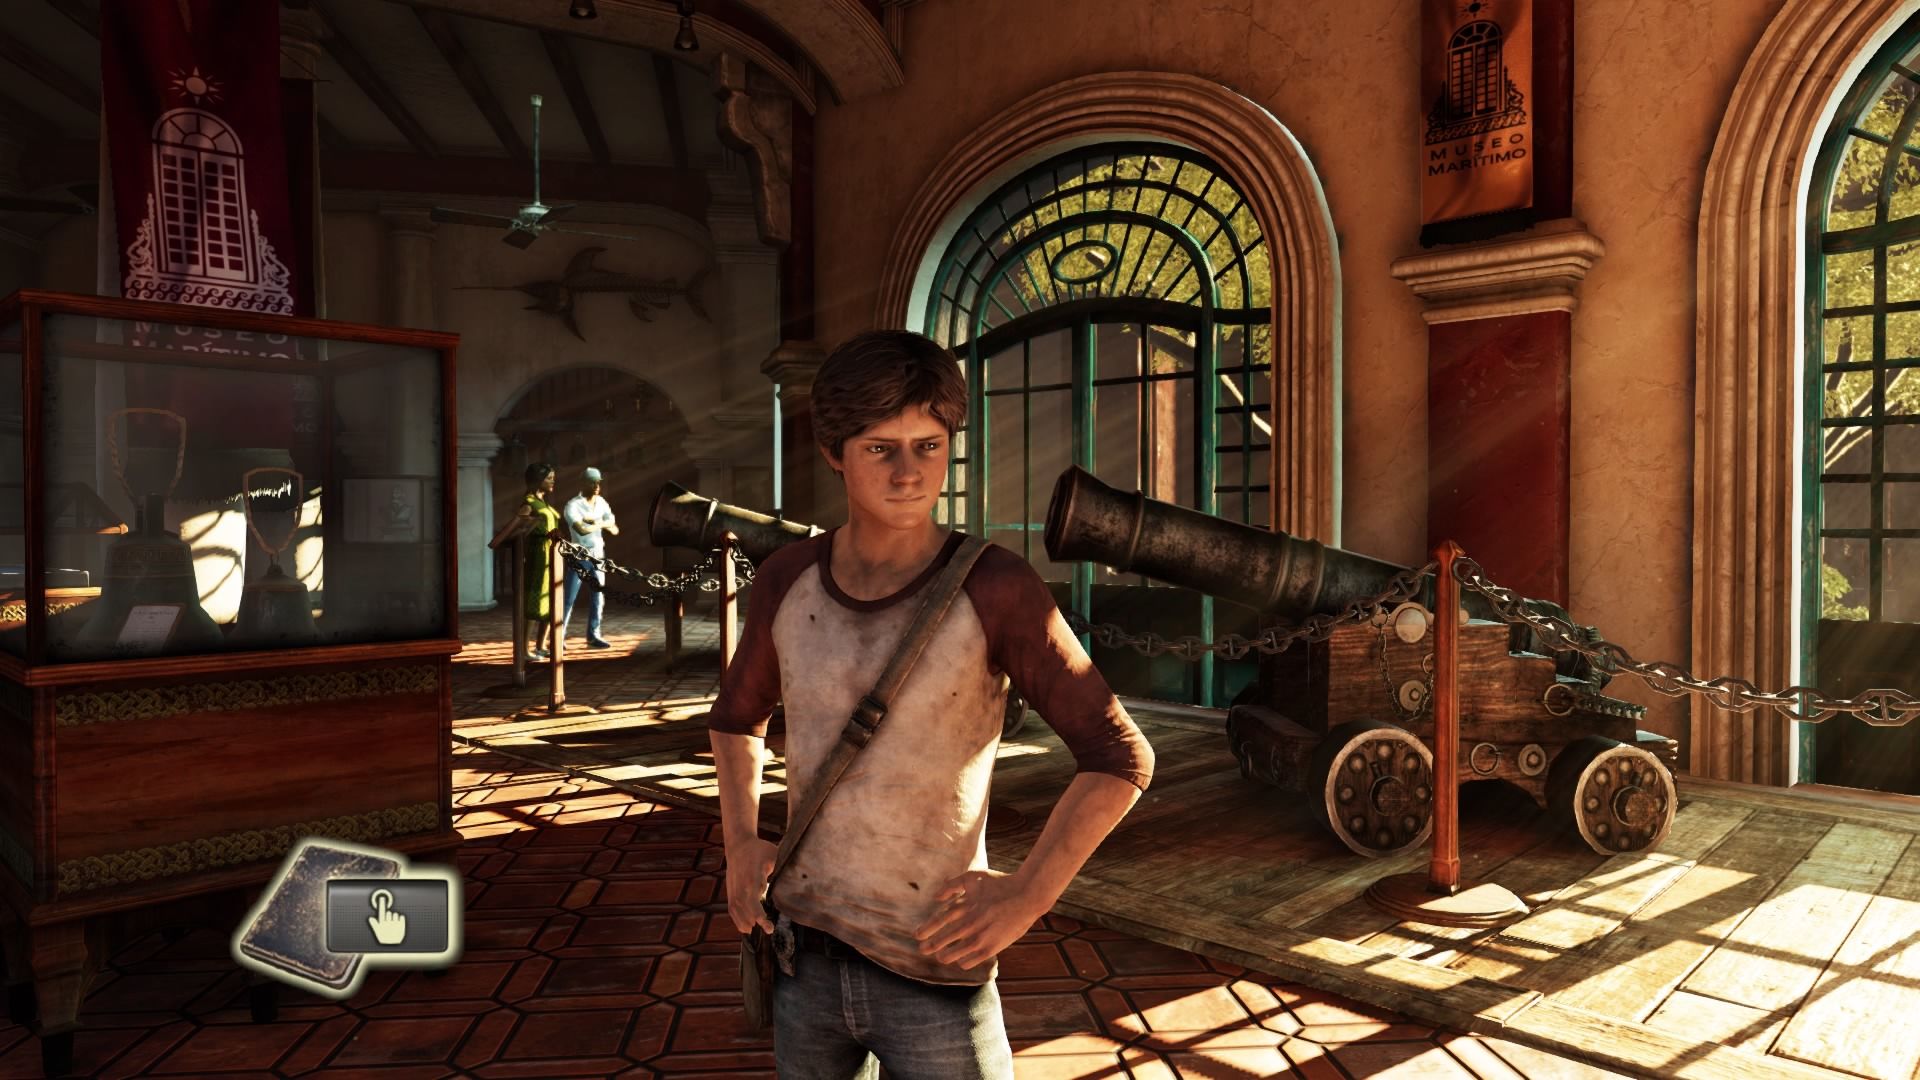 Uncharted 3: Drake's Deception (Remastered) Review